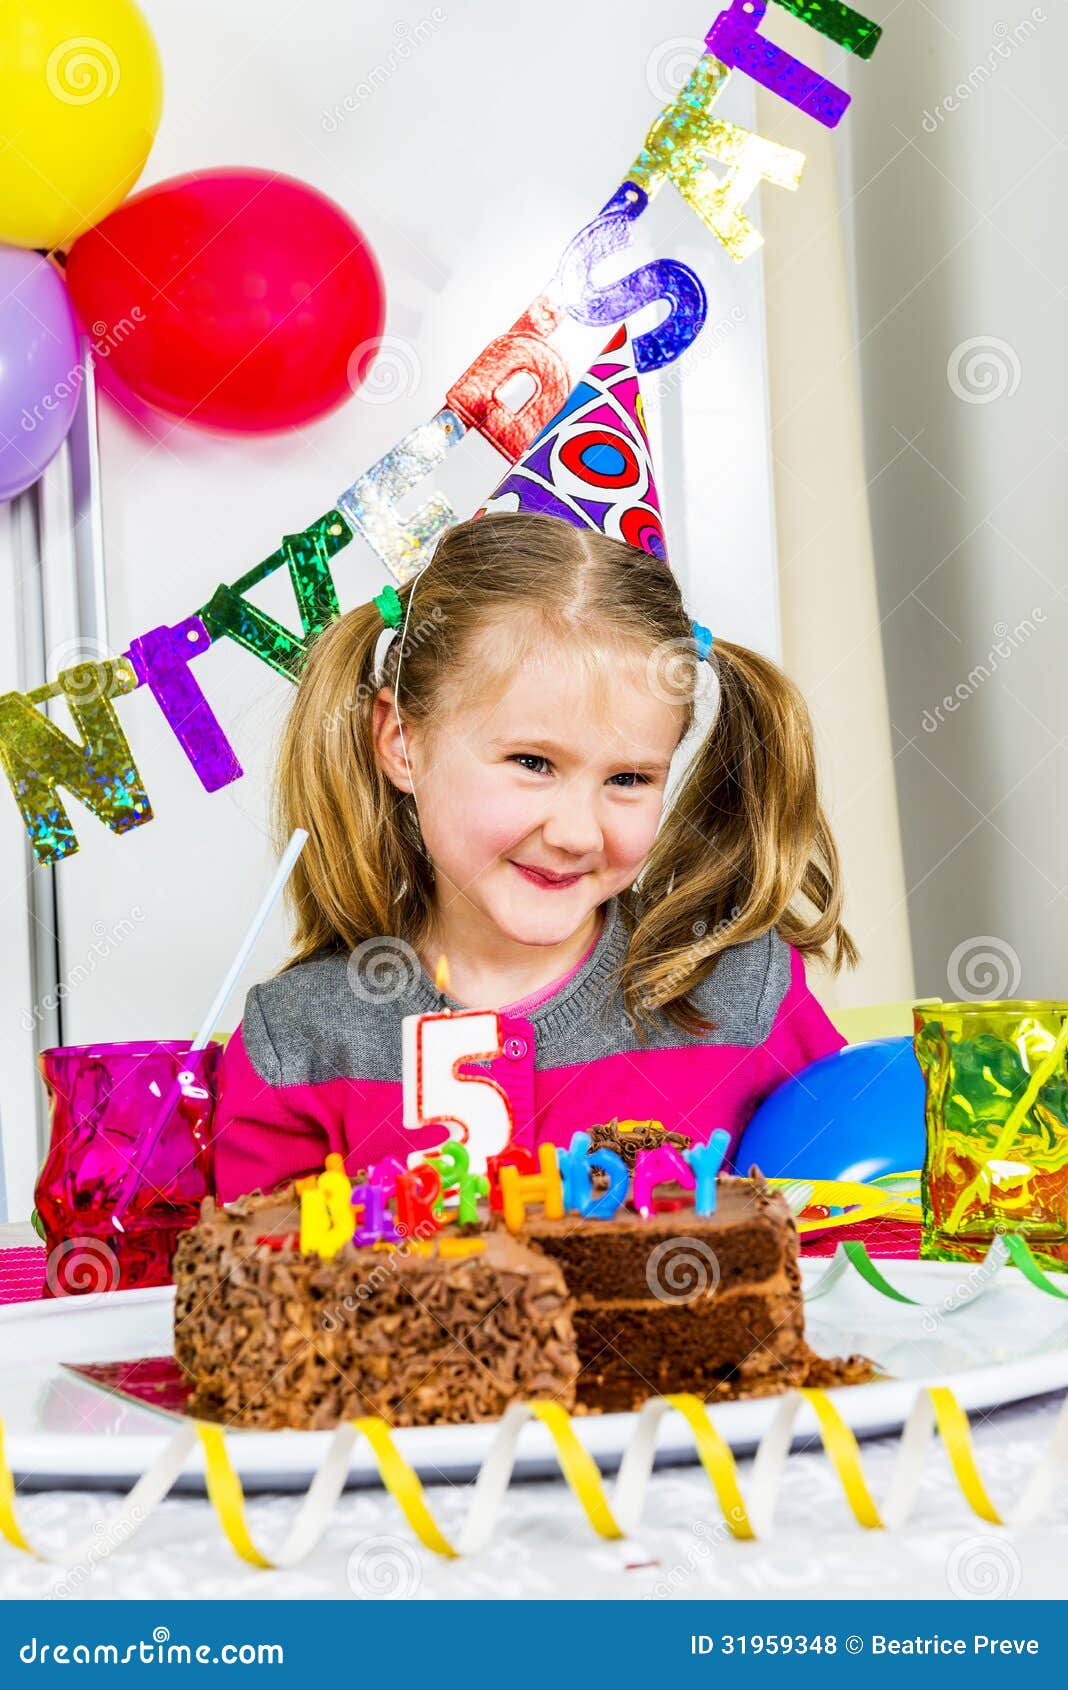 Big funny birthday party stock photo. Image of home ...